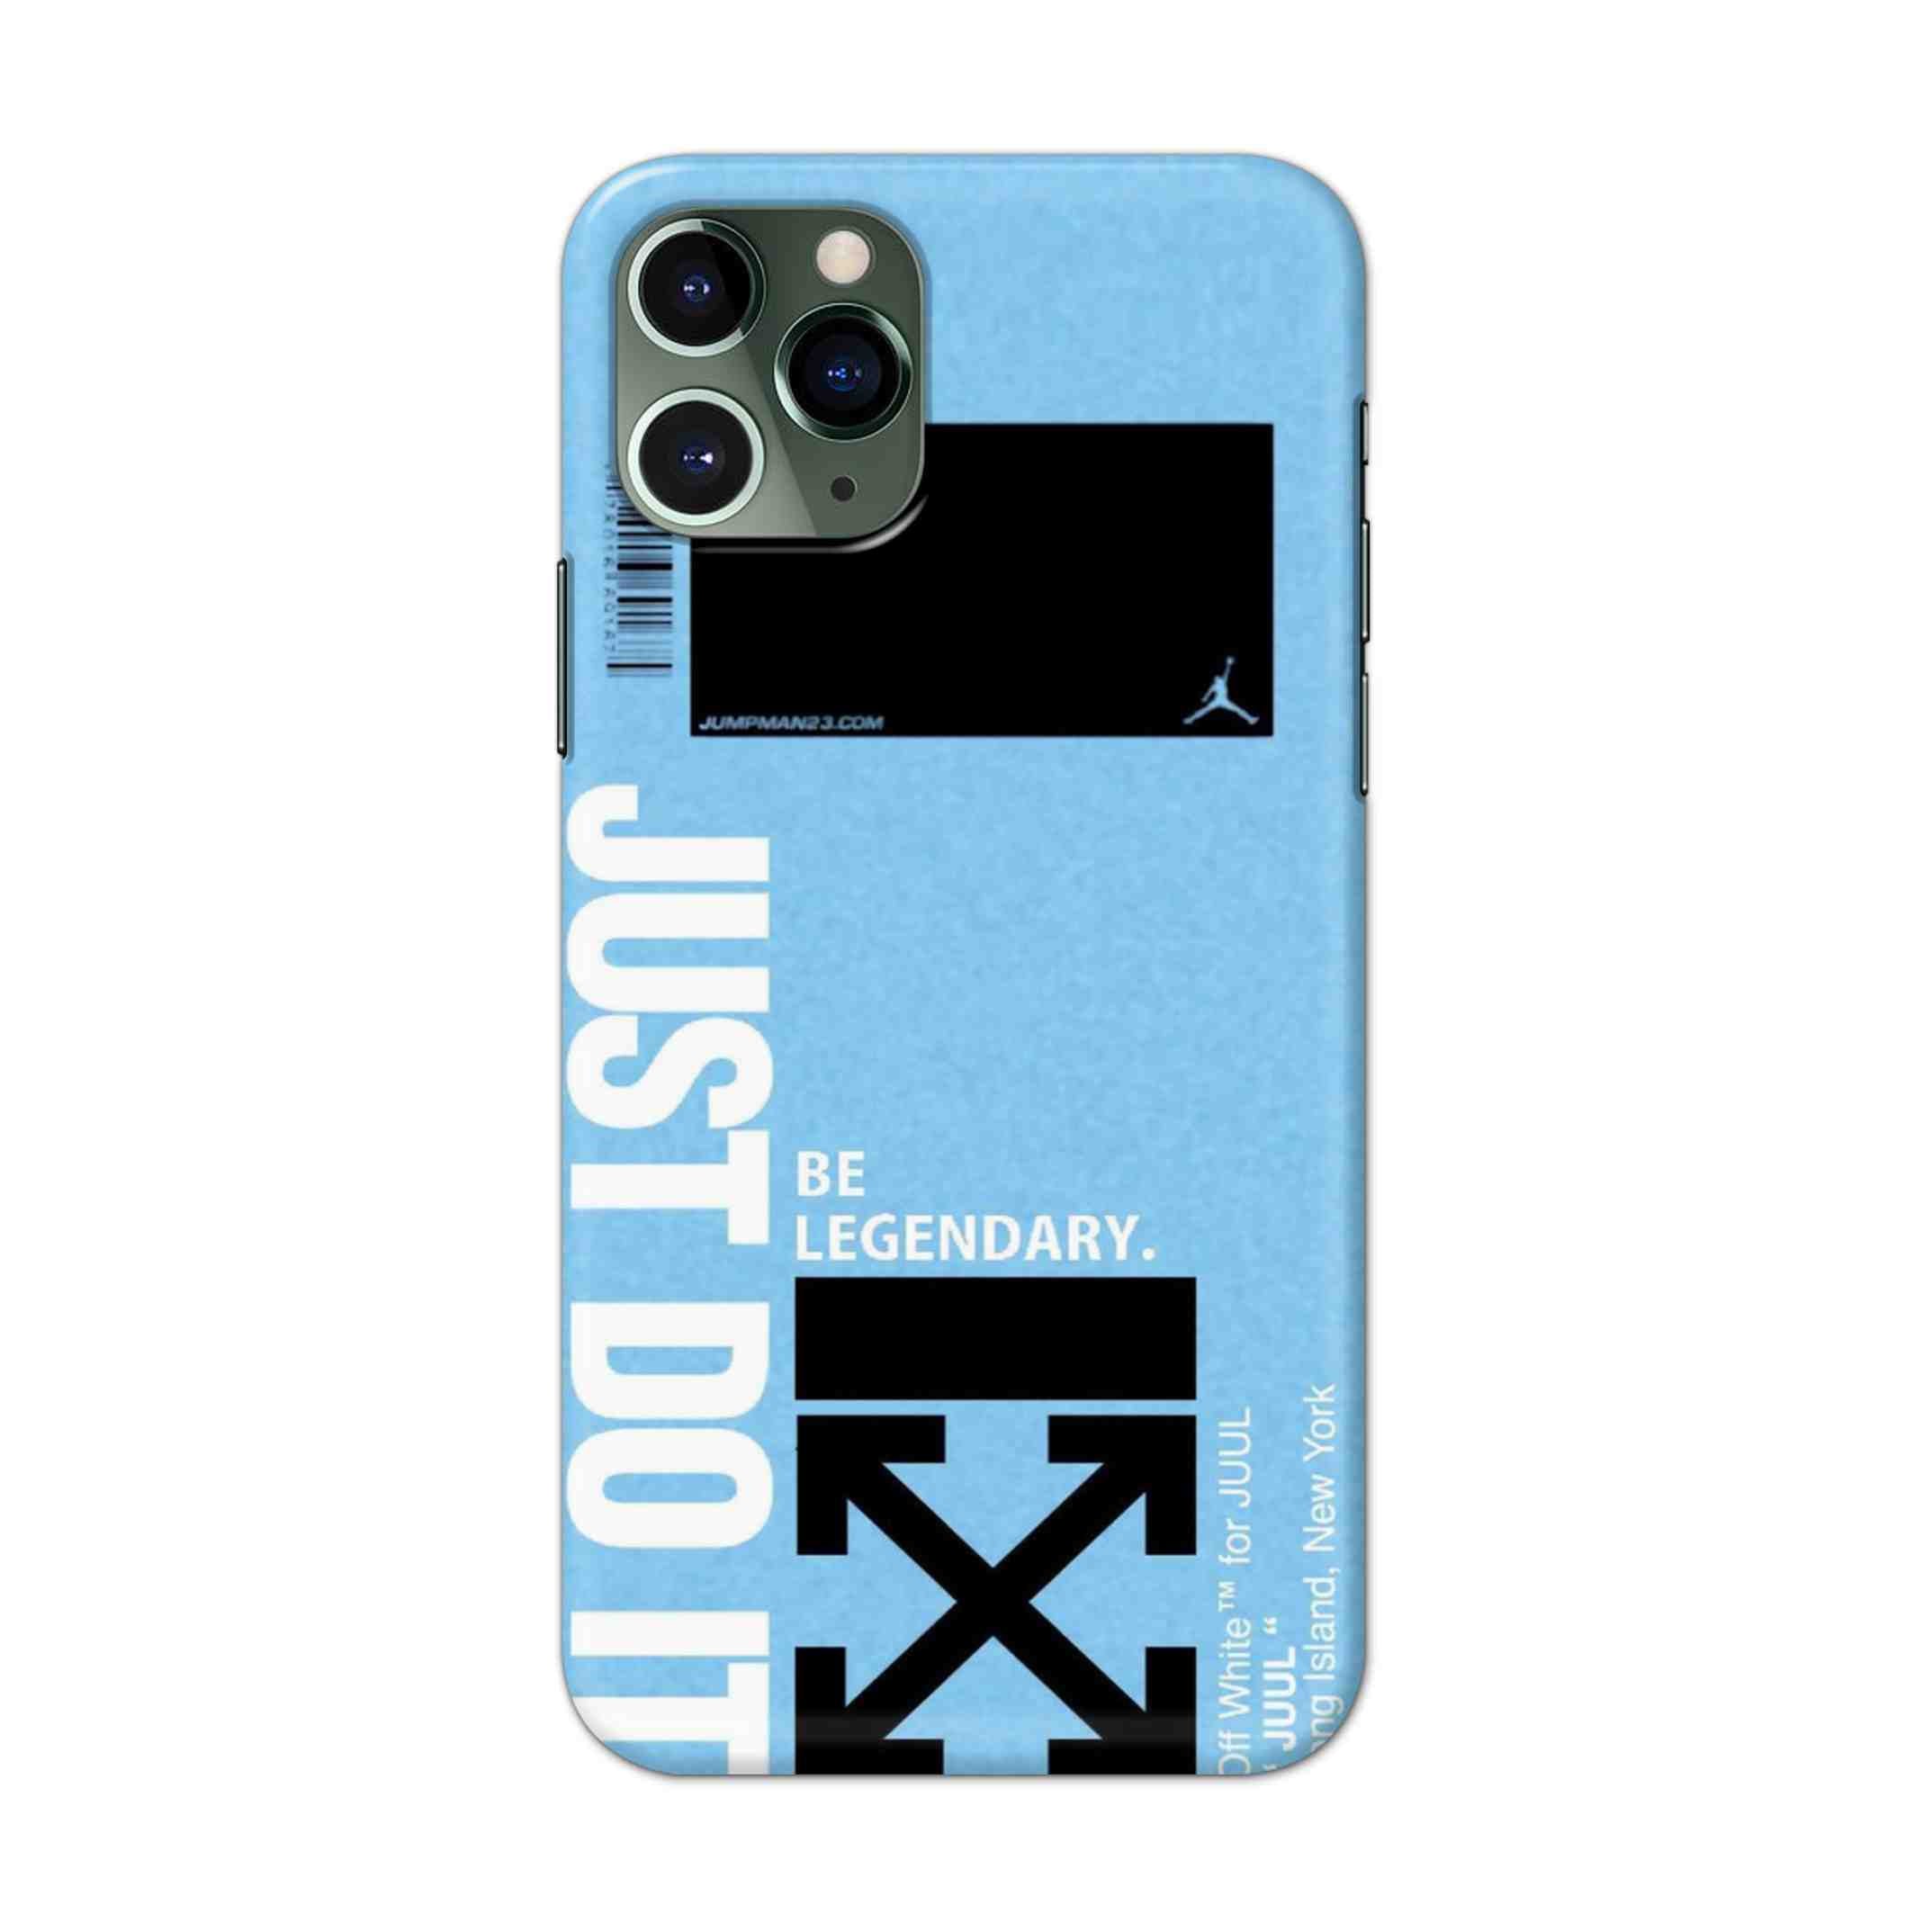 Buy Just Do It Hard Back Mobile Phone Case/Cover For iPhone 11 Pro Max Online